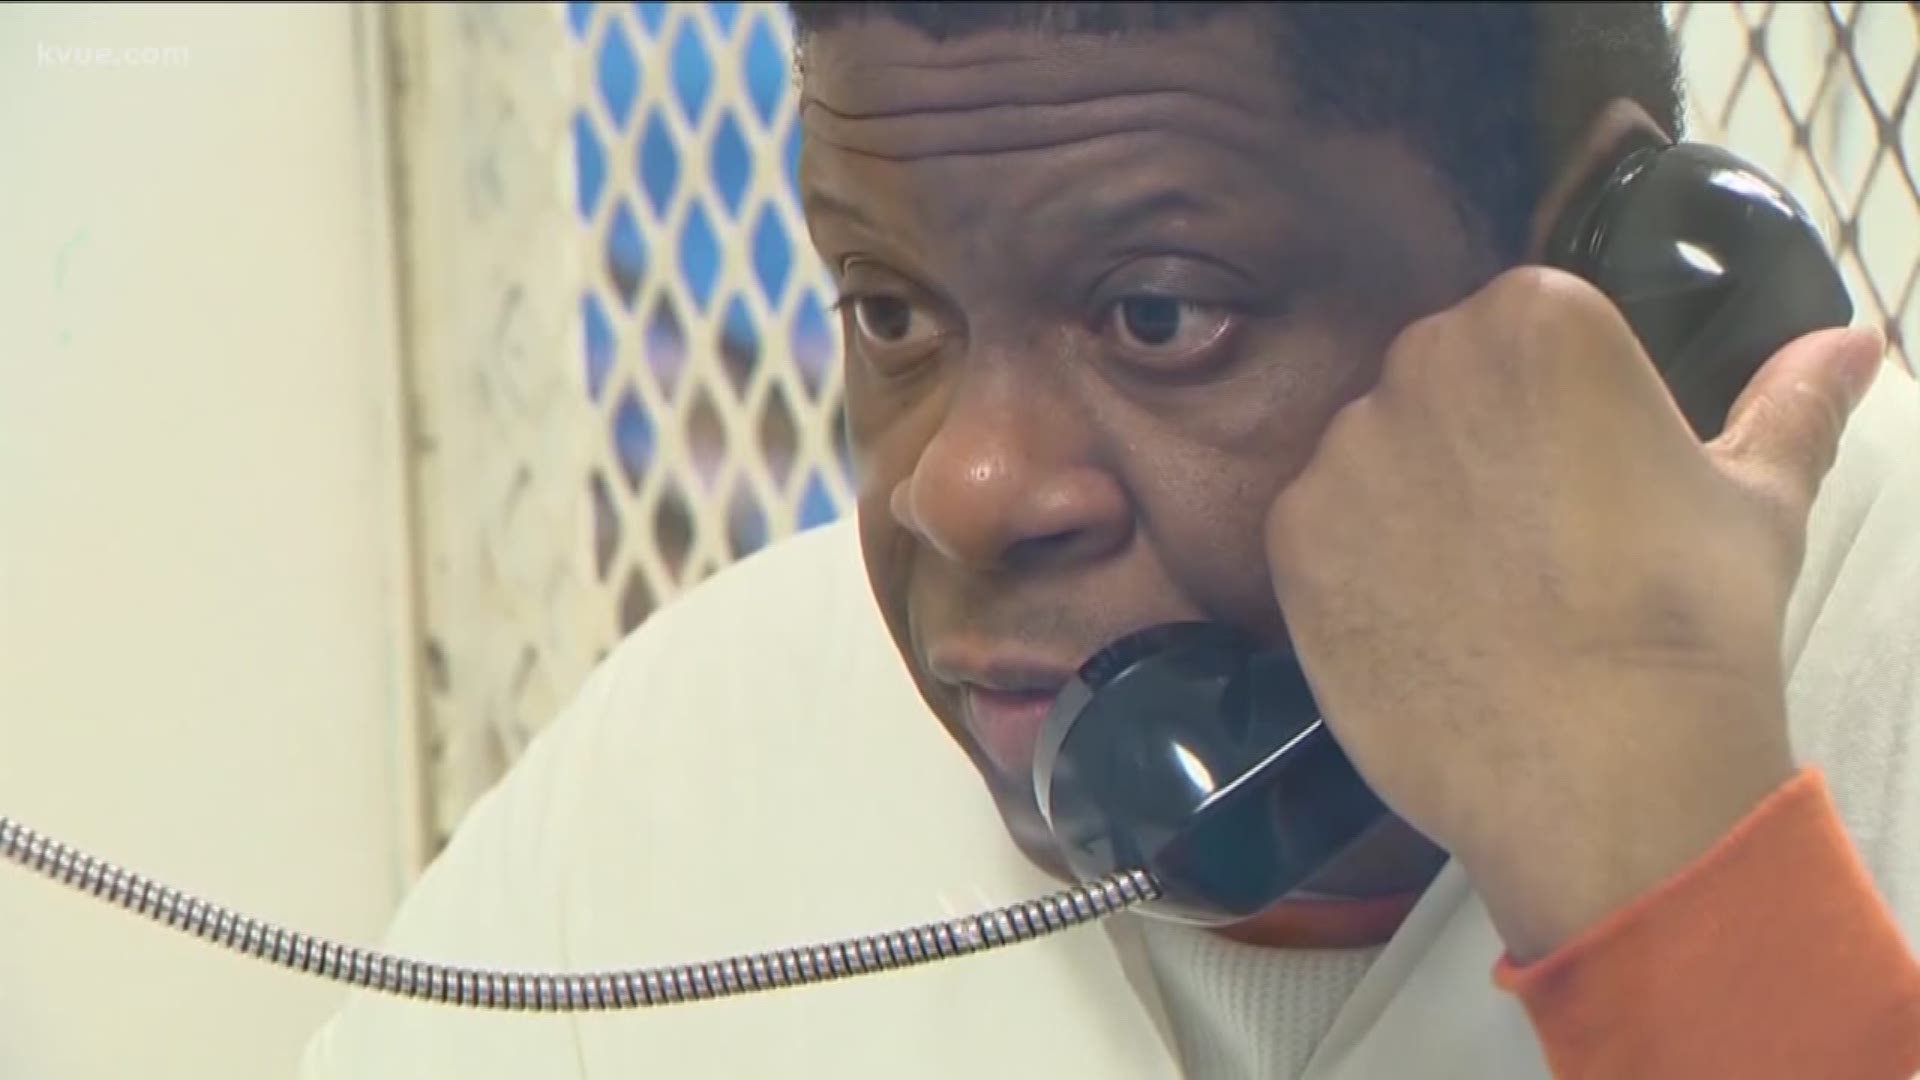 There's a new lawsuit trying to block the execution of Rodney Reed.